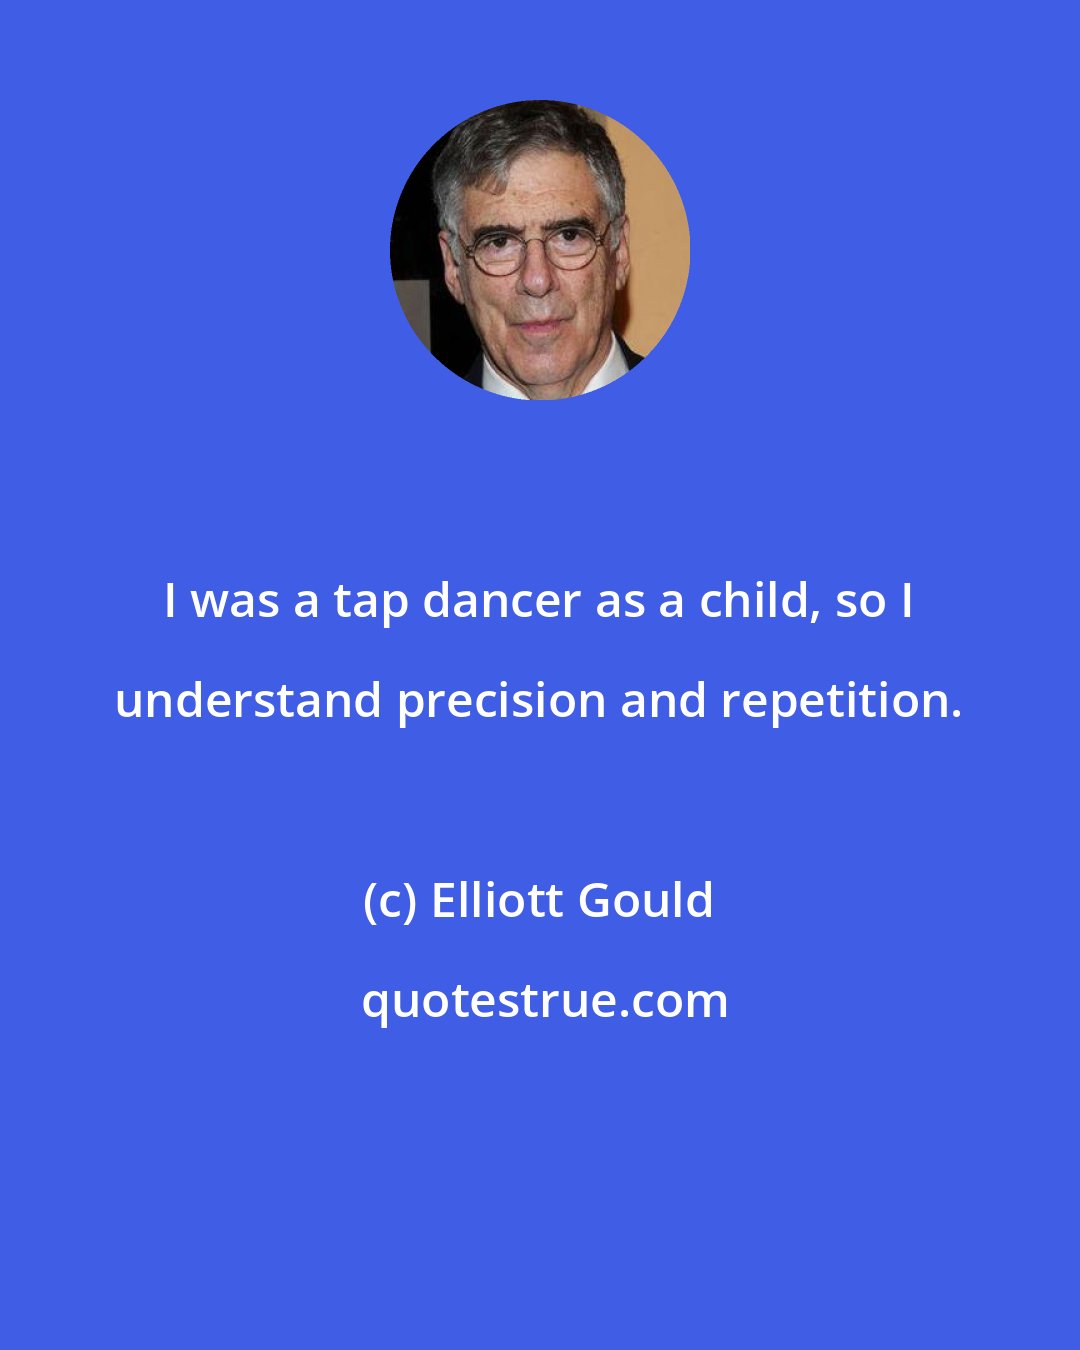 Elliott Gould: I was a tap dancer as a child, so I understand precision and repetition.